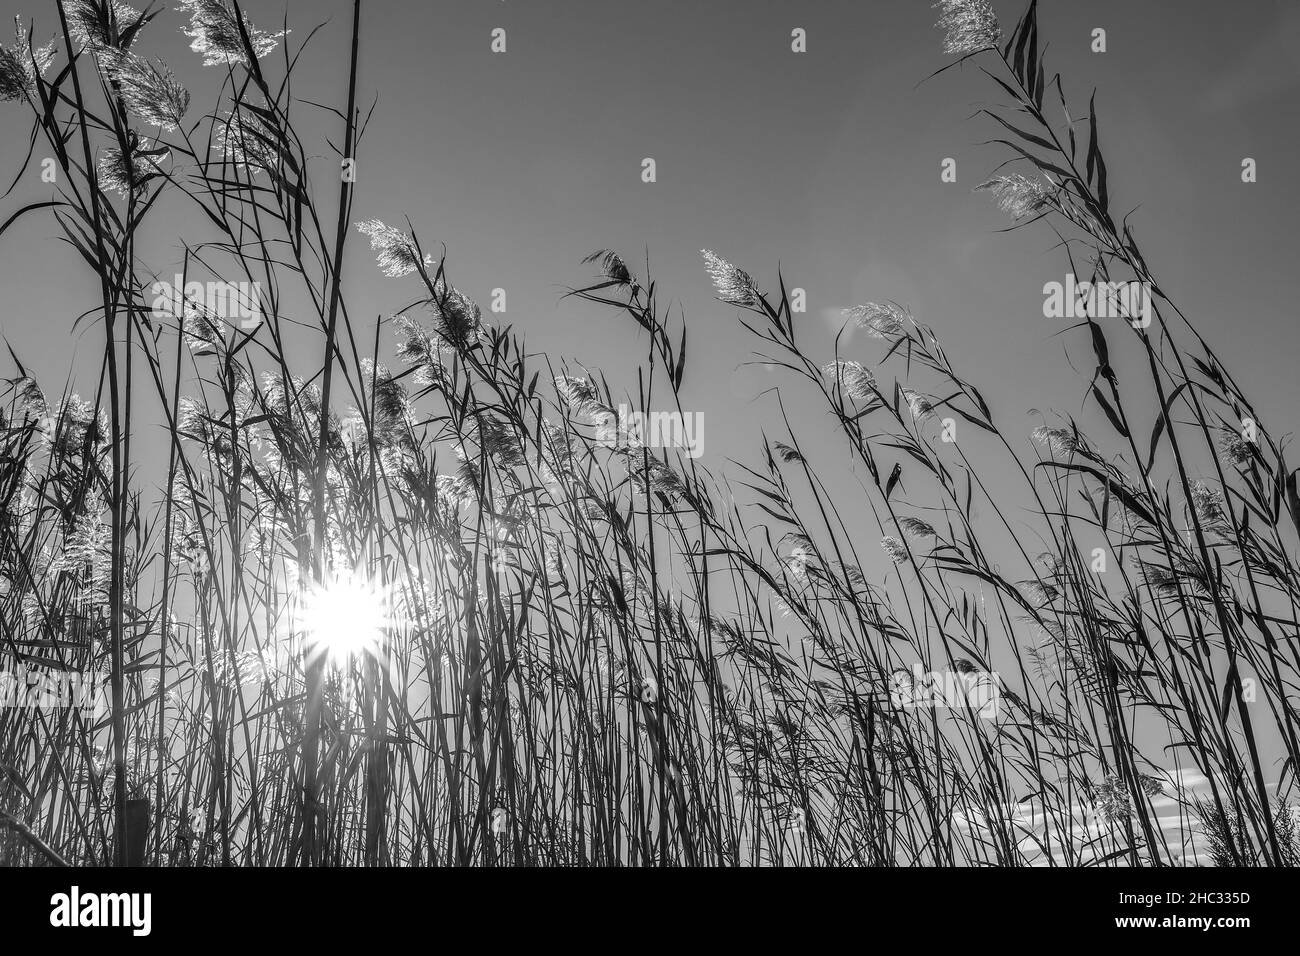 reed plants in bright sunlight in black and white Stock Photo